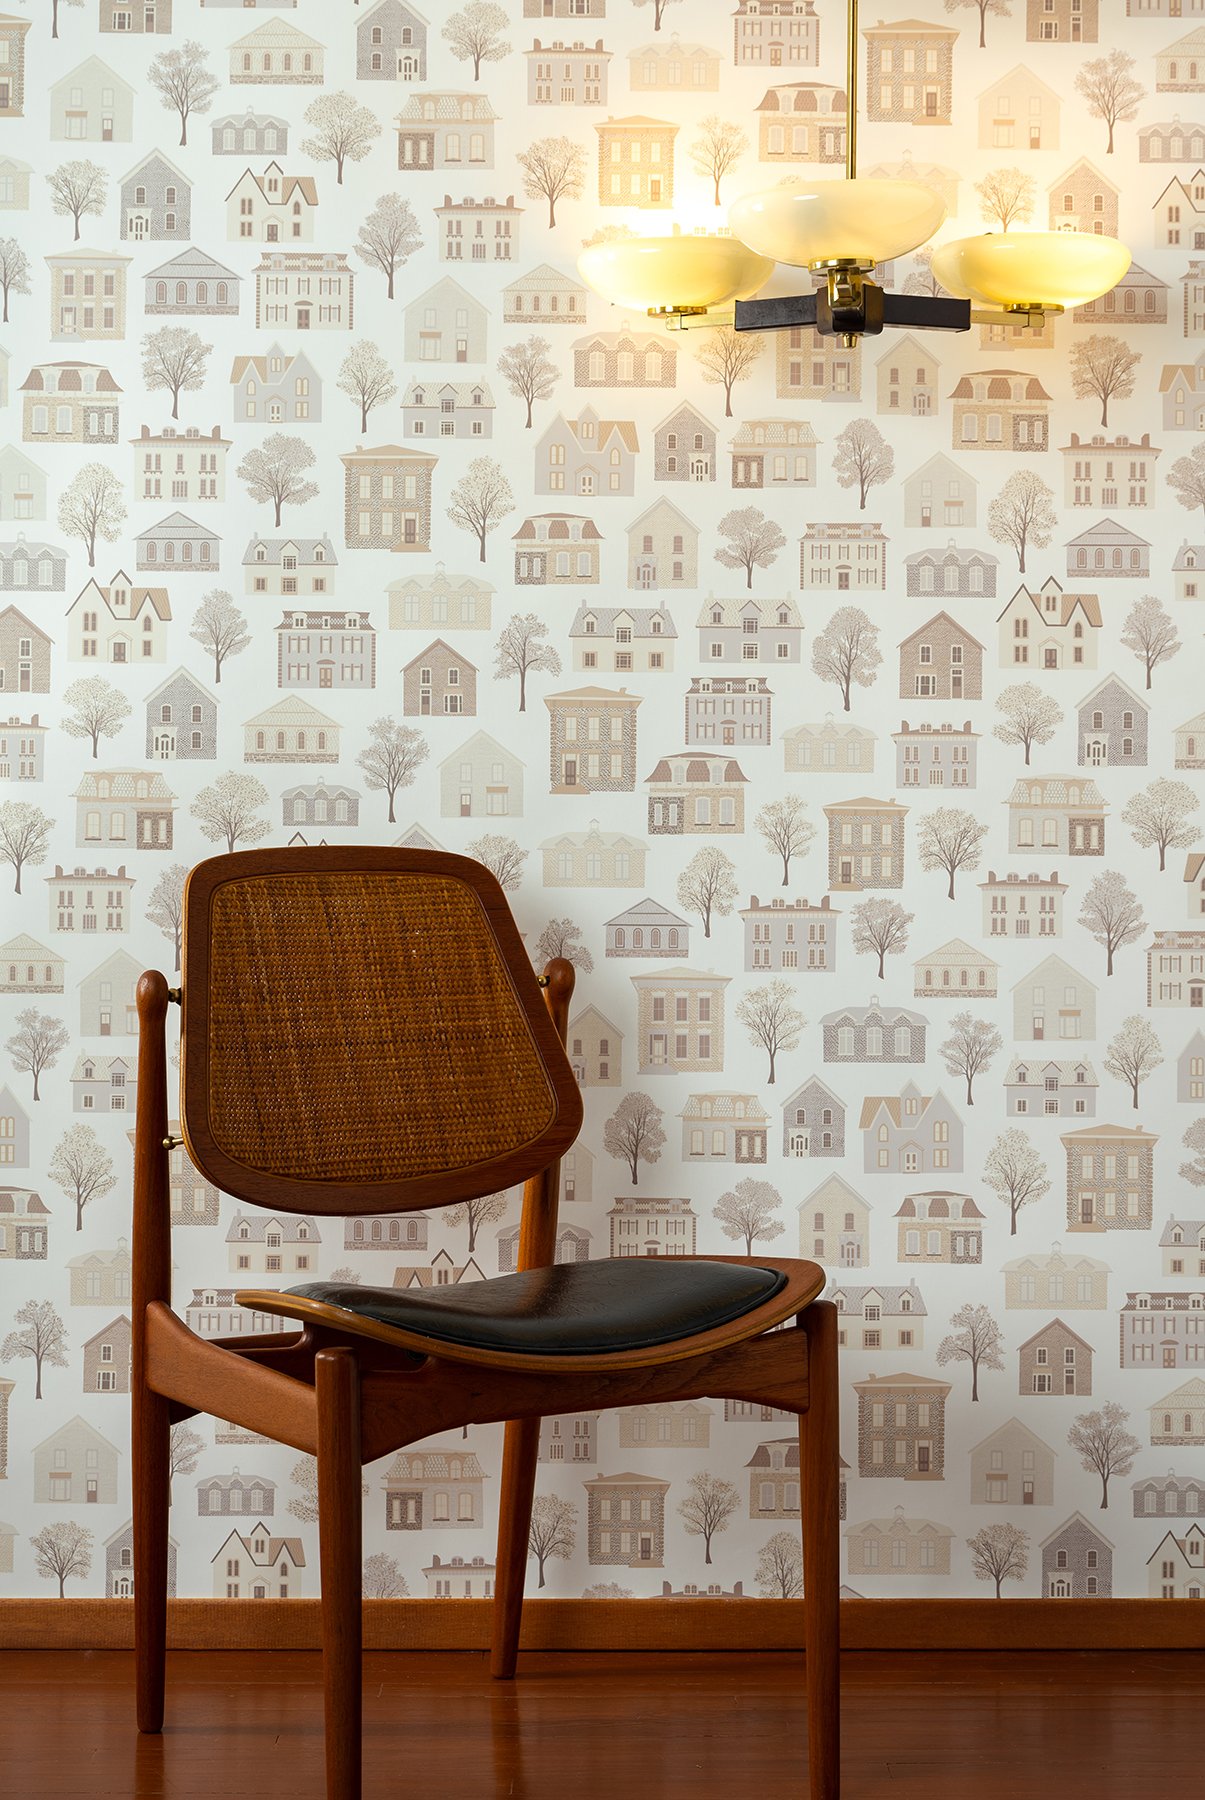 Kate Golding Historical Home wallpaper // Modern wallcoverings and interior decor.